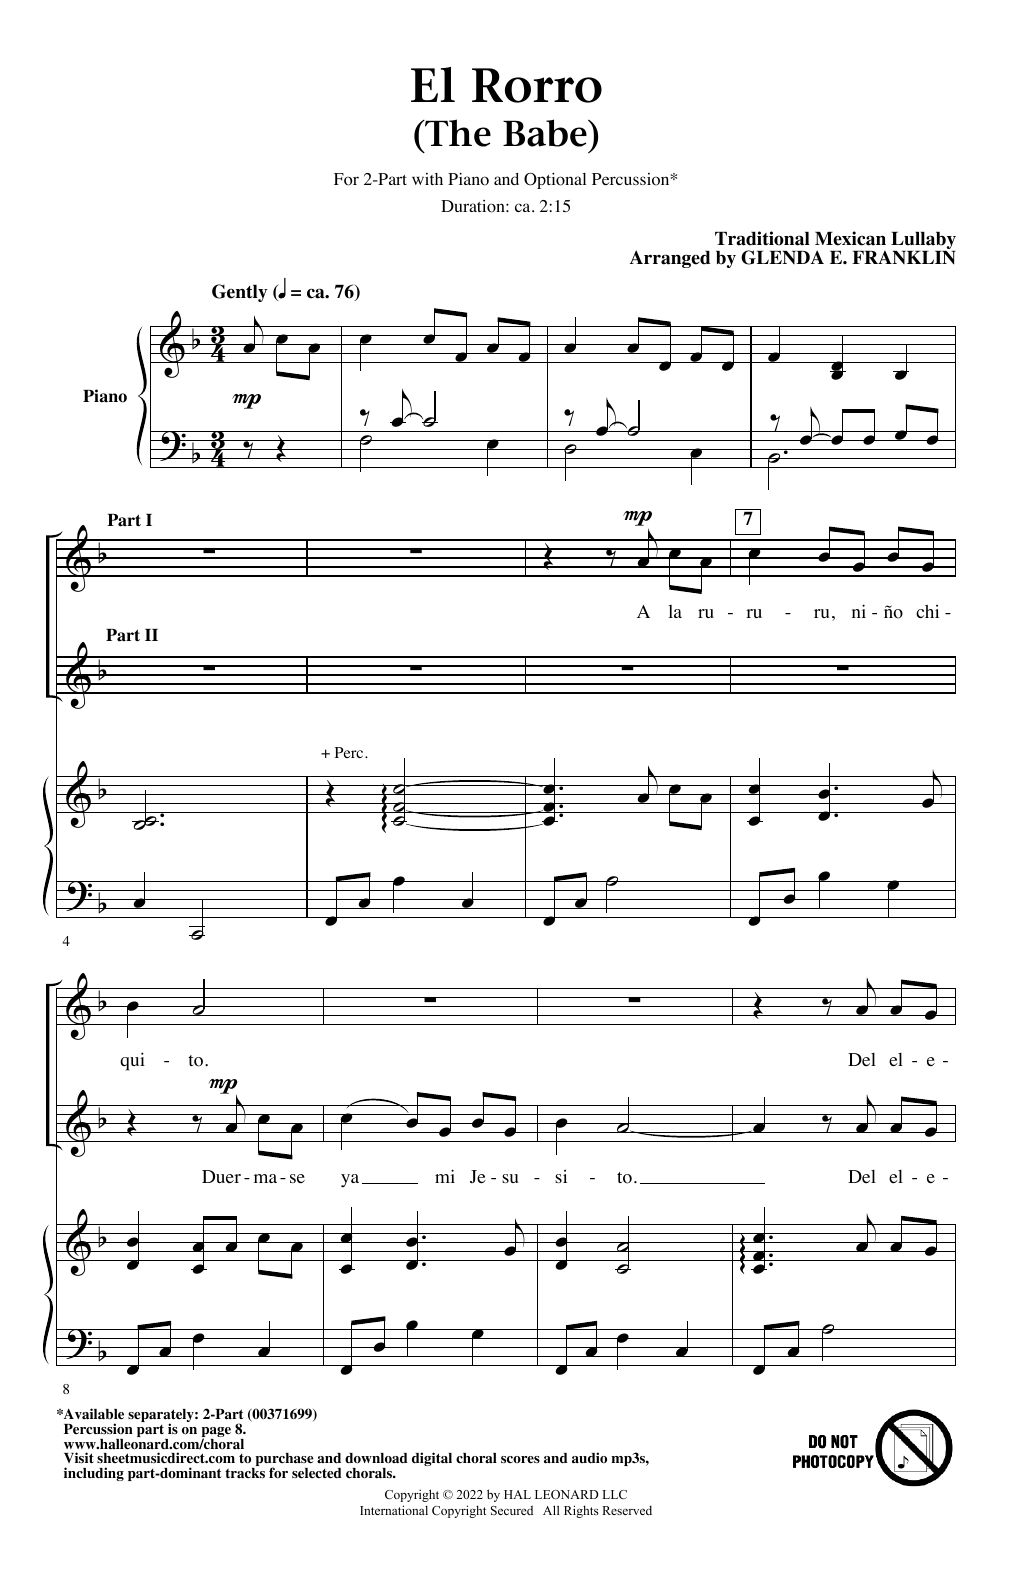 Download Traditional Mexican Lullaby El Rorro (The Babe) (arr. Glenda E. Fra Sheet Music